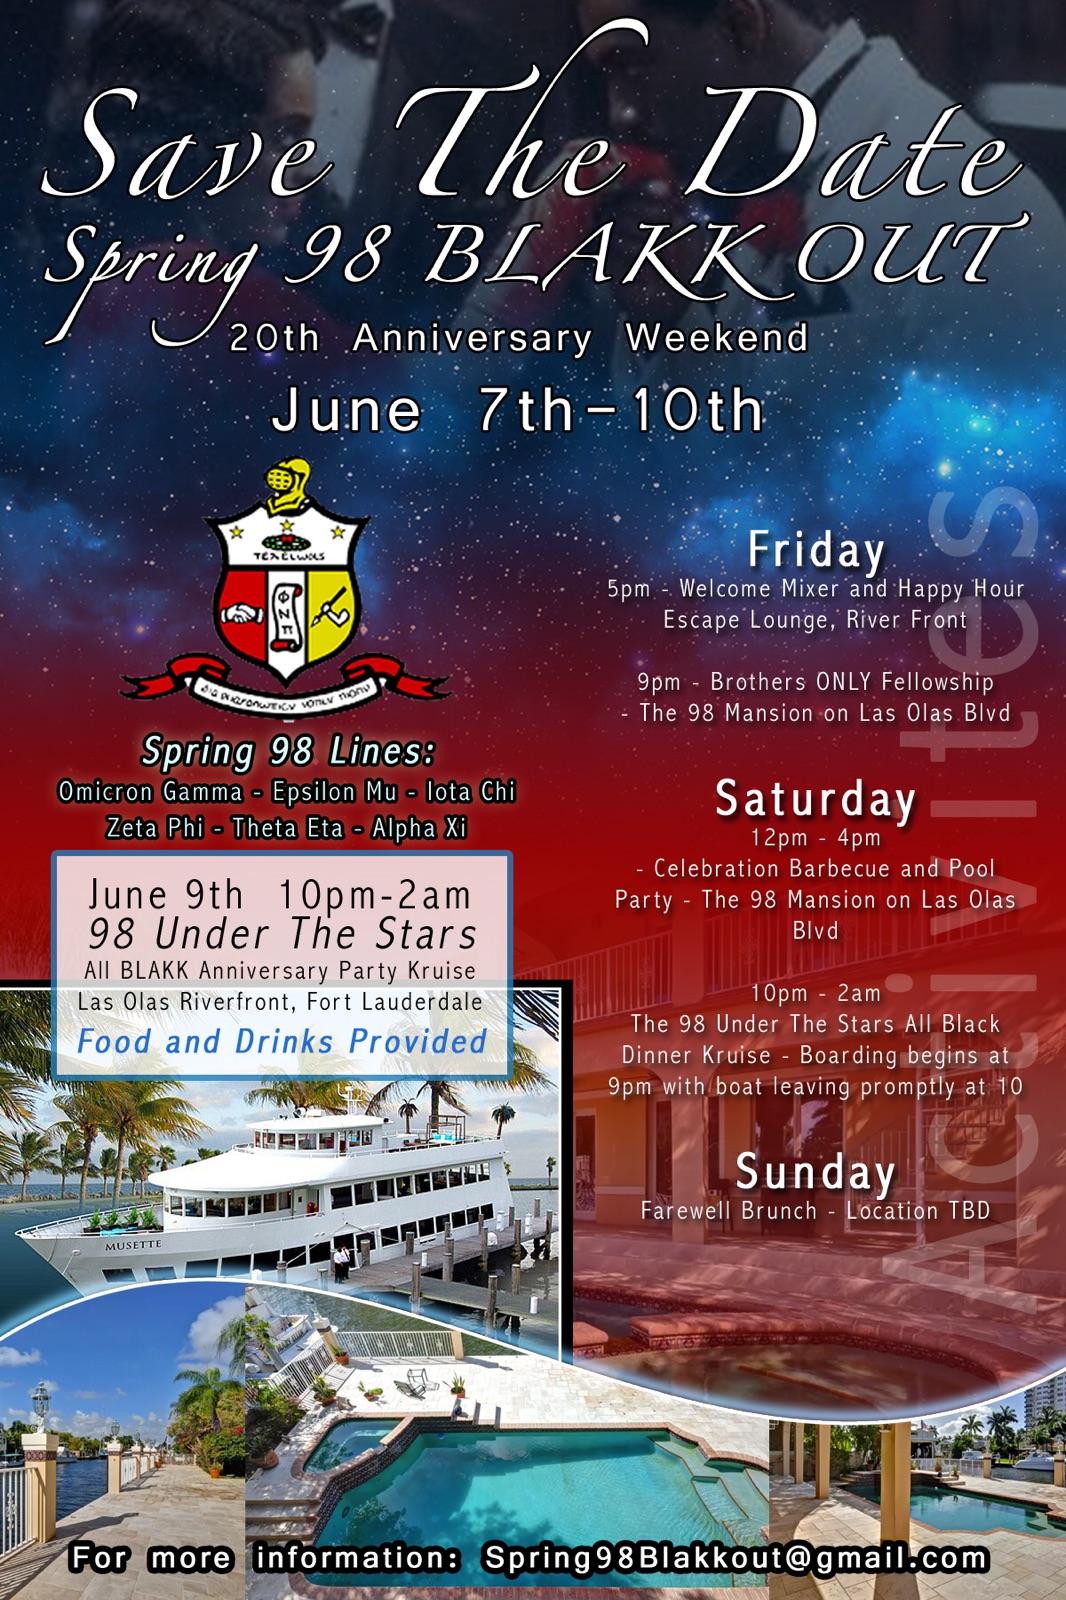 Spring 98 BLAKK OUT 20th ANNIVERSARY WEEKEND PARTY KRUISE